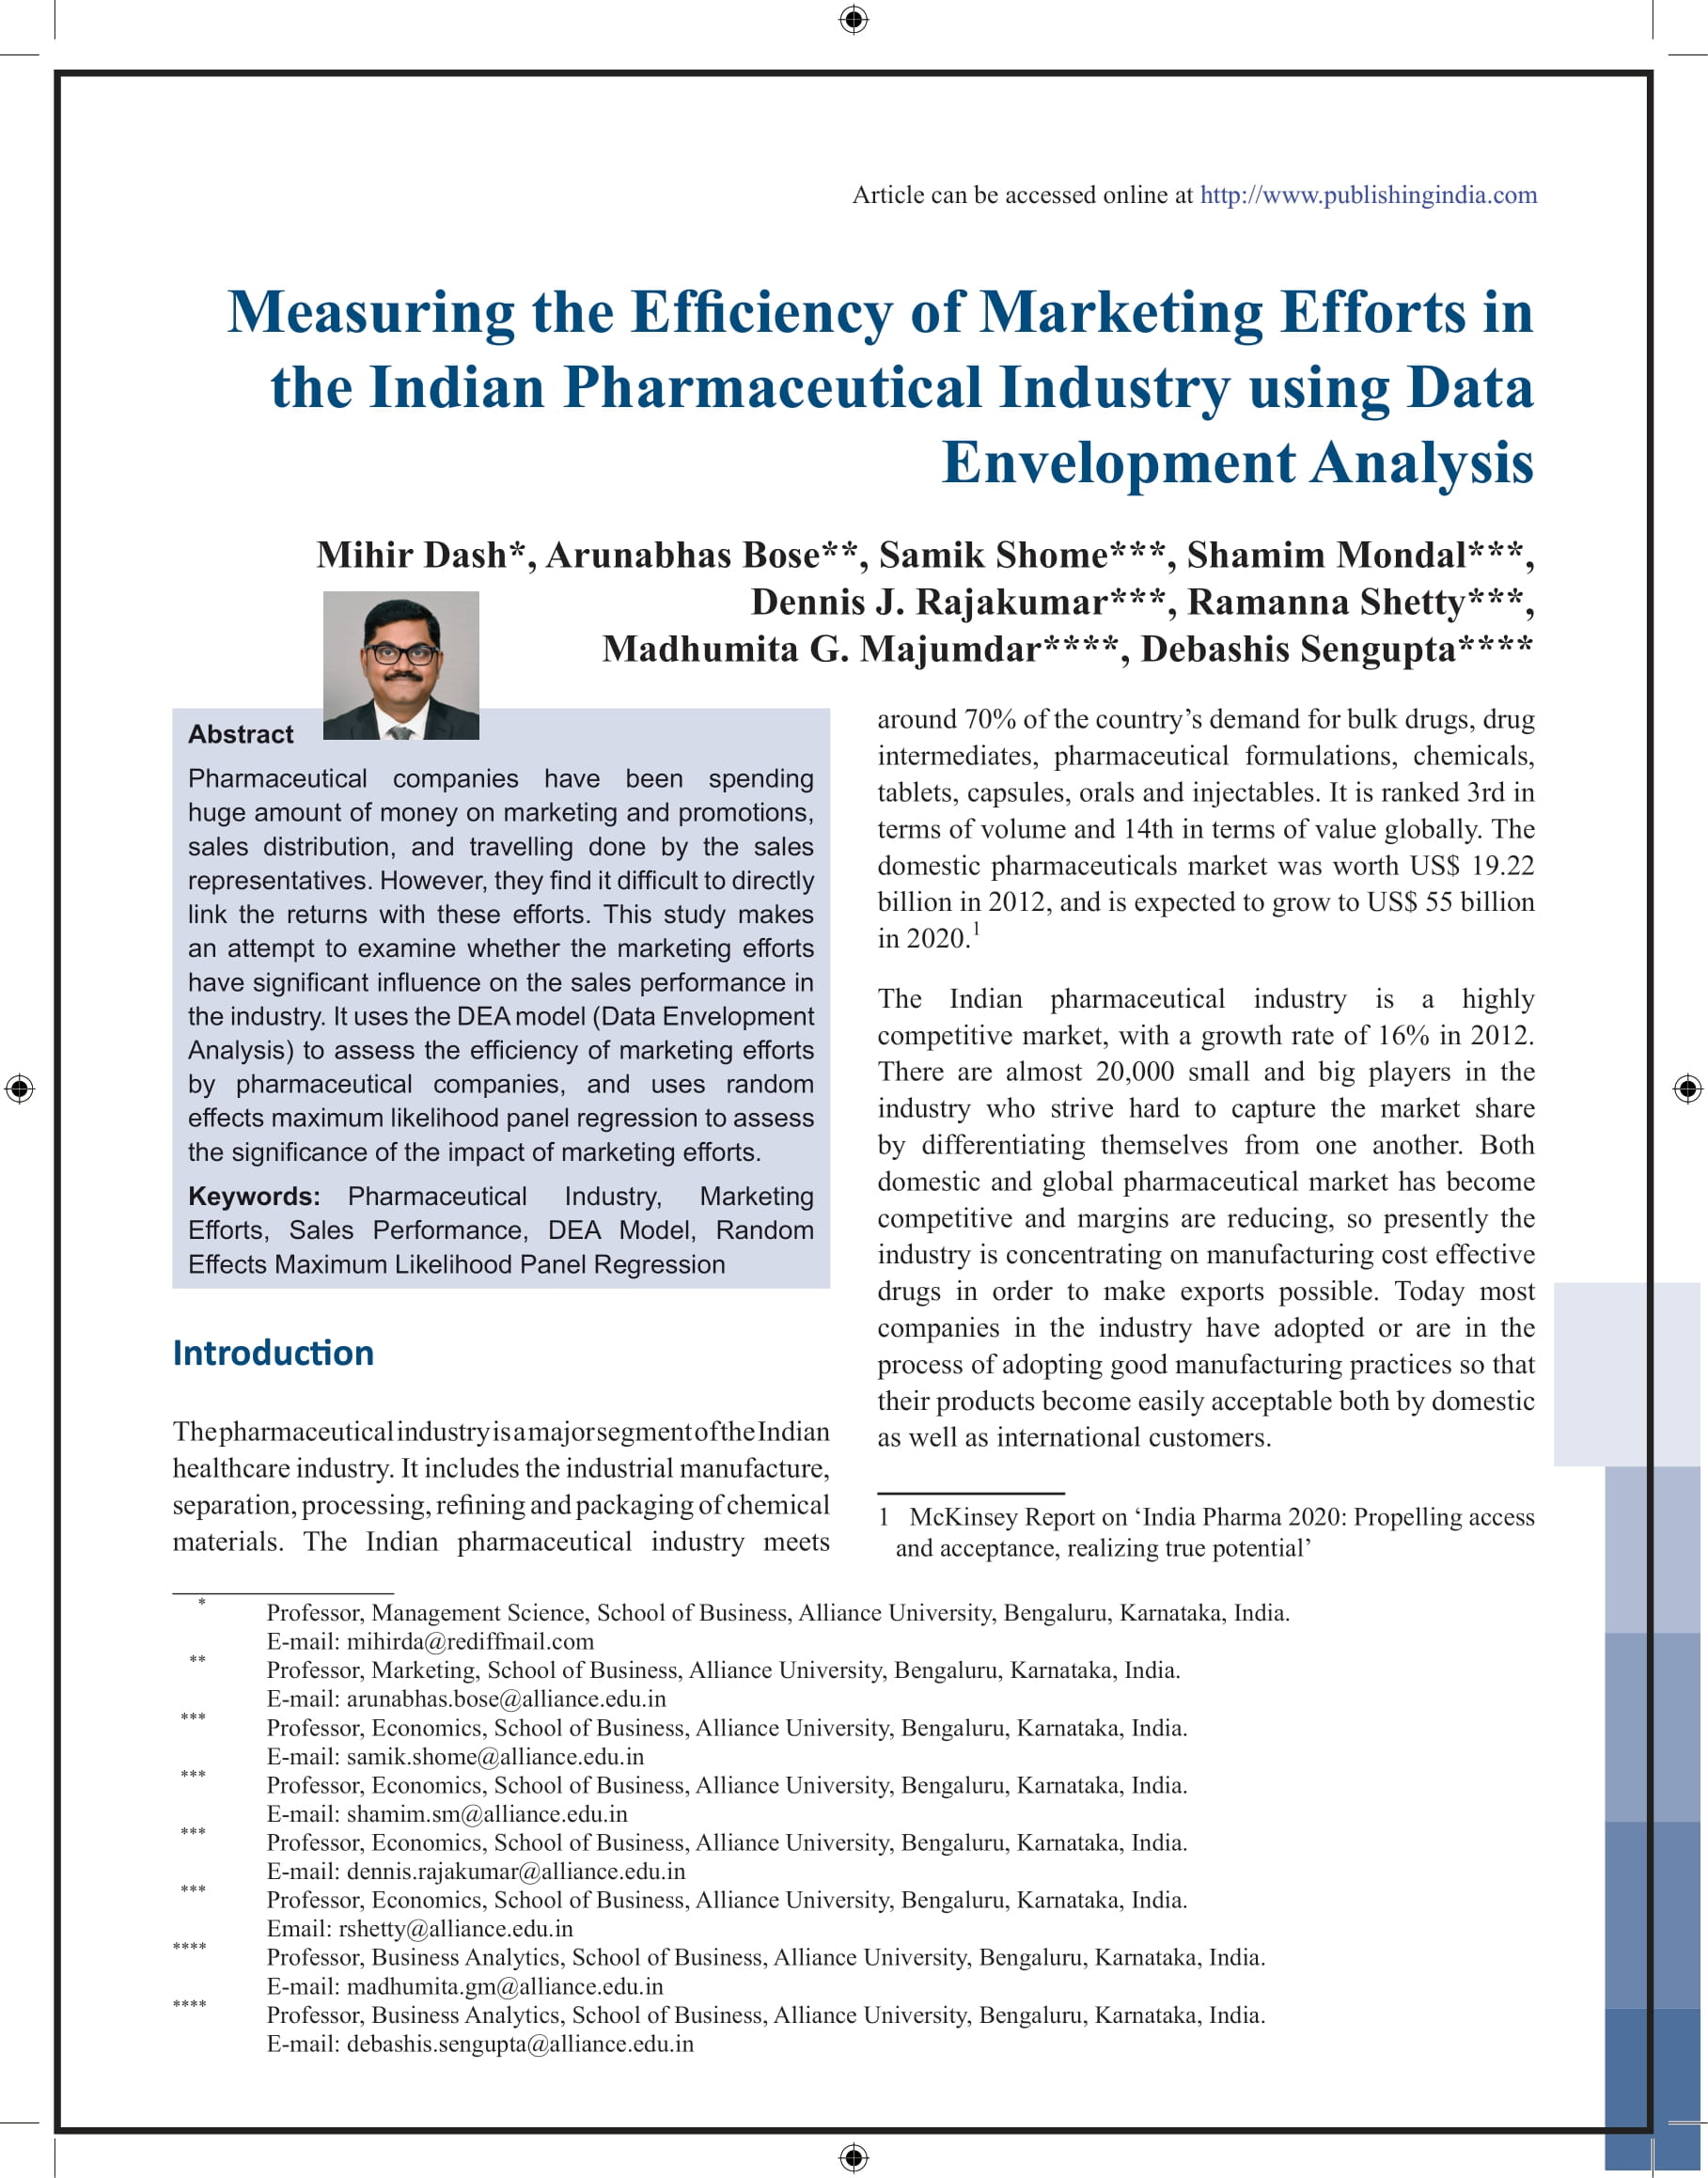 Measuring the Efficiency of Marketing Efforts in the Indian Pharmaceutical Industry using Data Envelopment Analysis